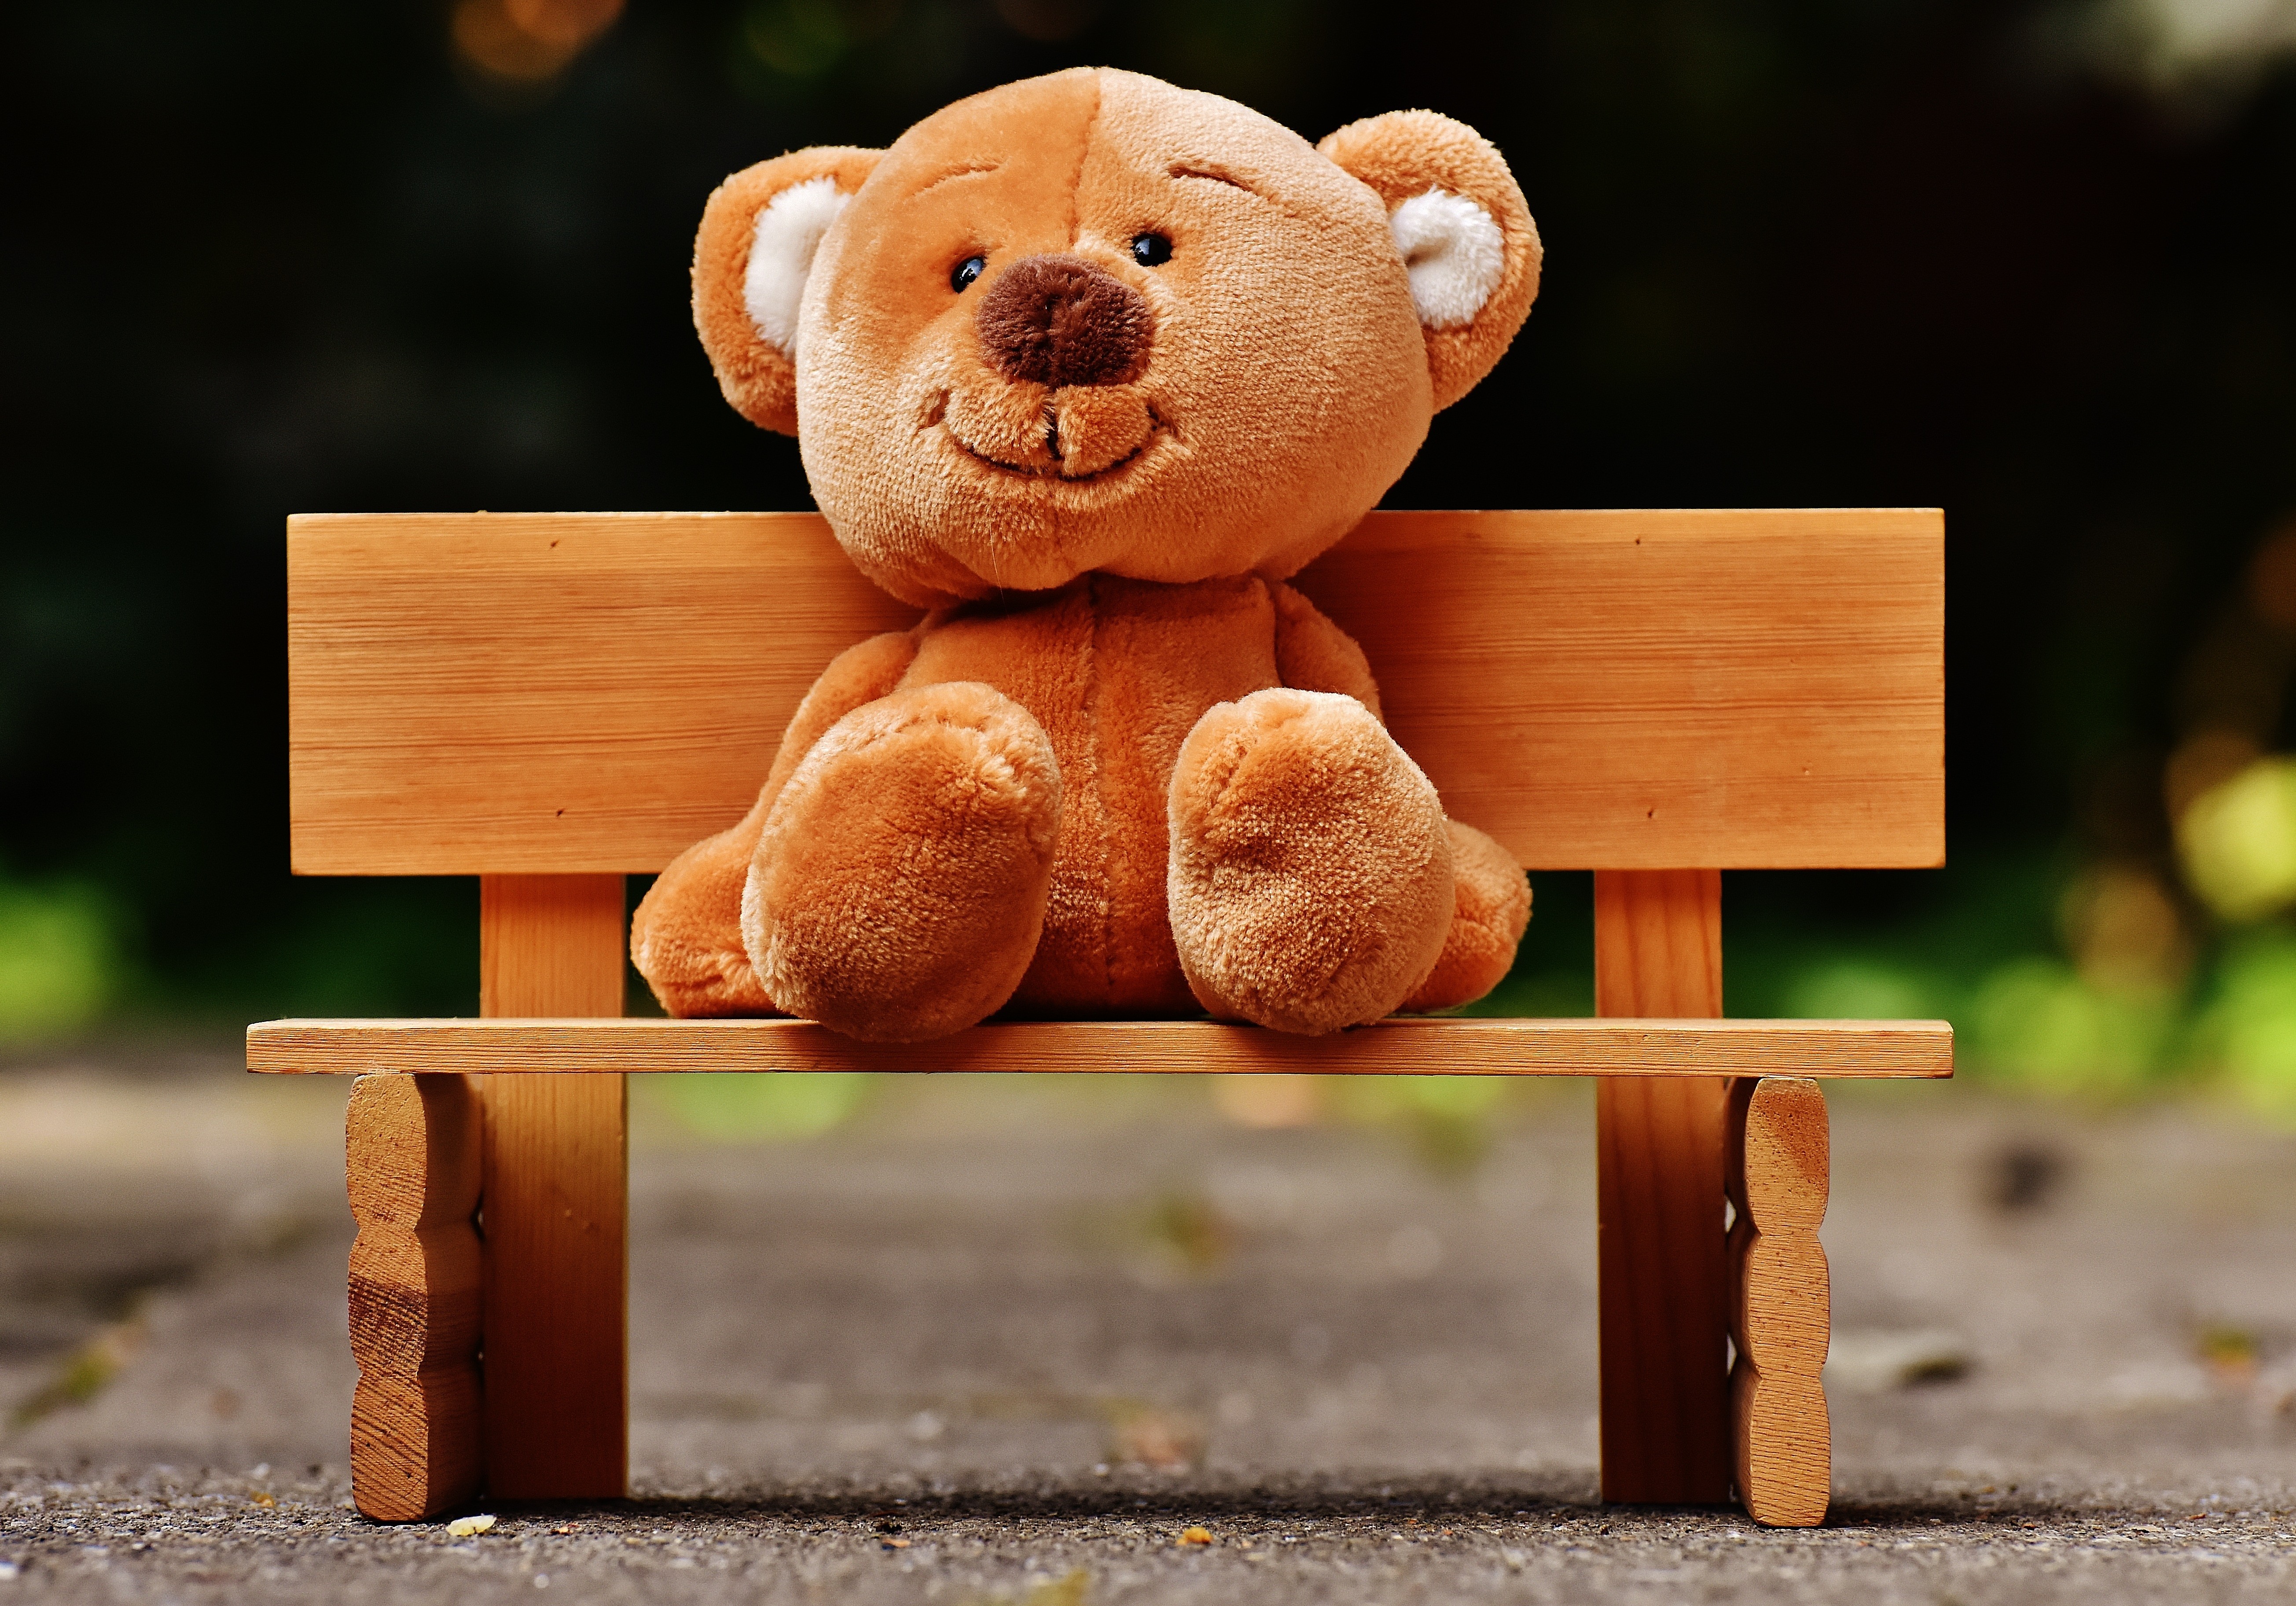 General 5217x3649 bench teddy bears nature outdoors road